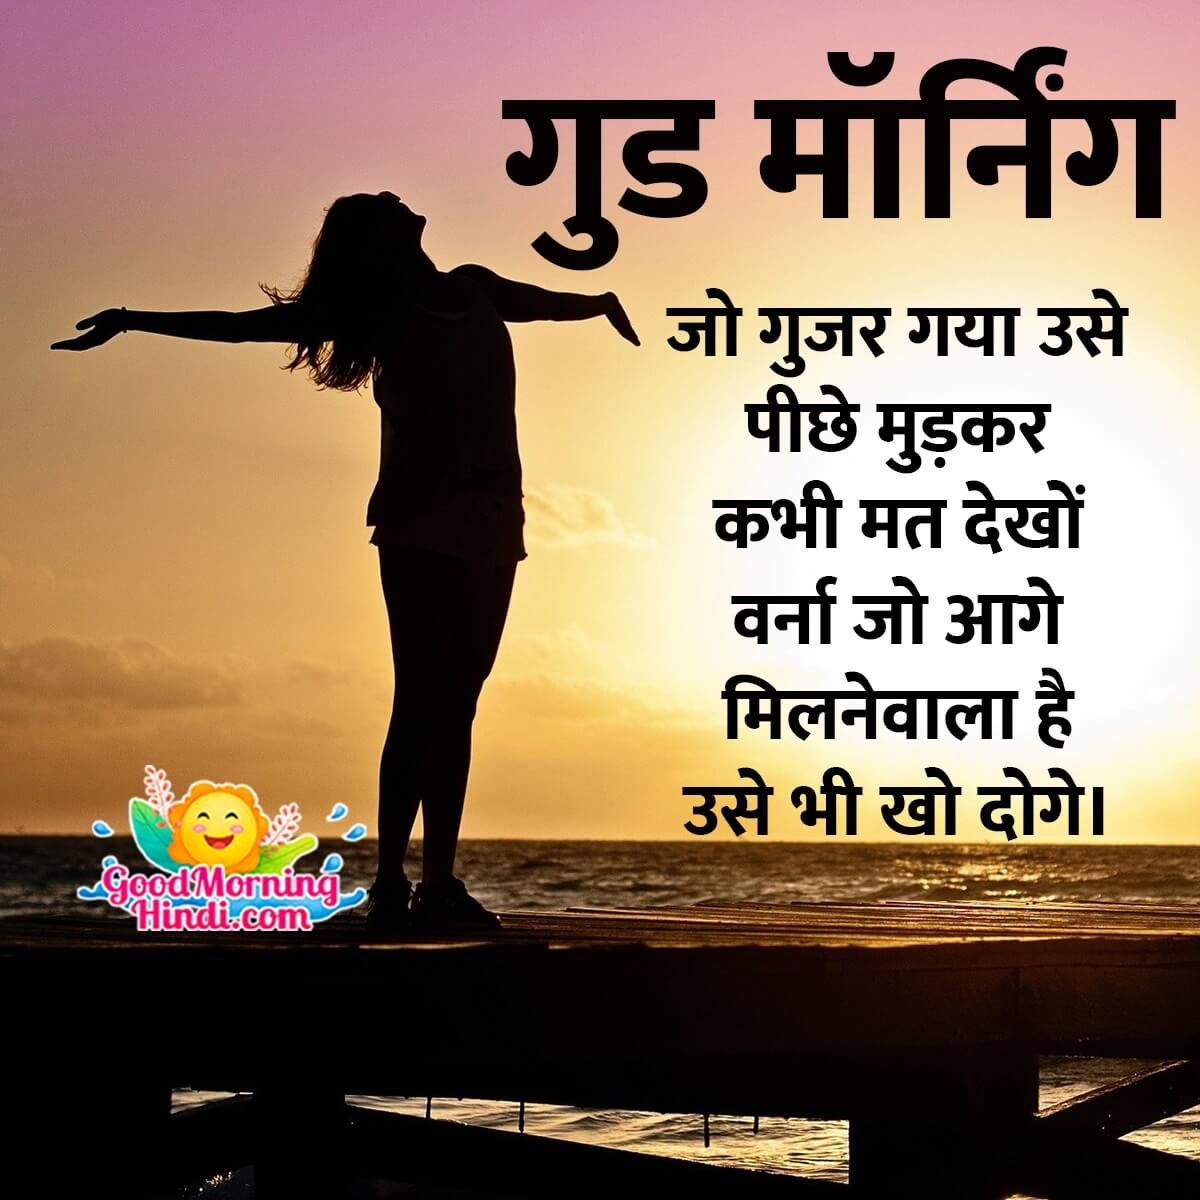 Good Morning Hindi Quotes For Whatsapp - Good Morning Wishes ...